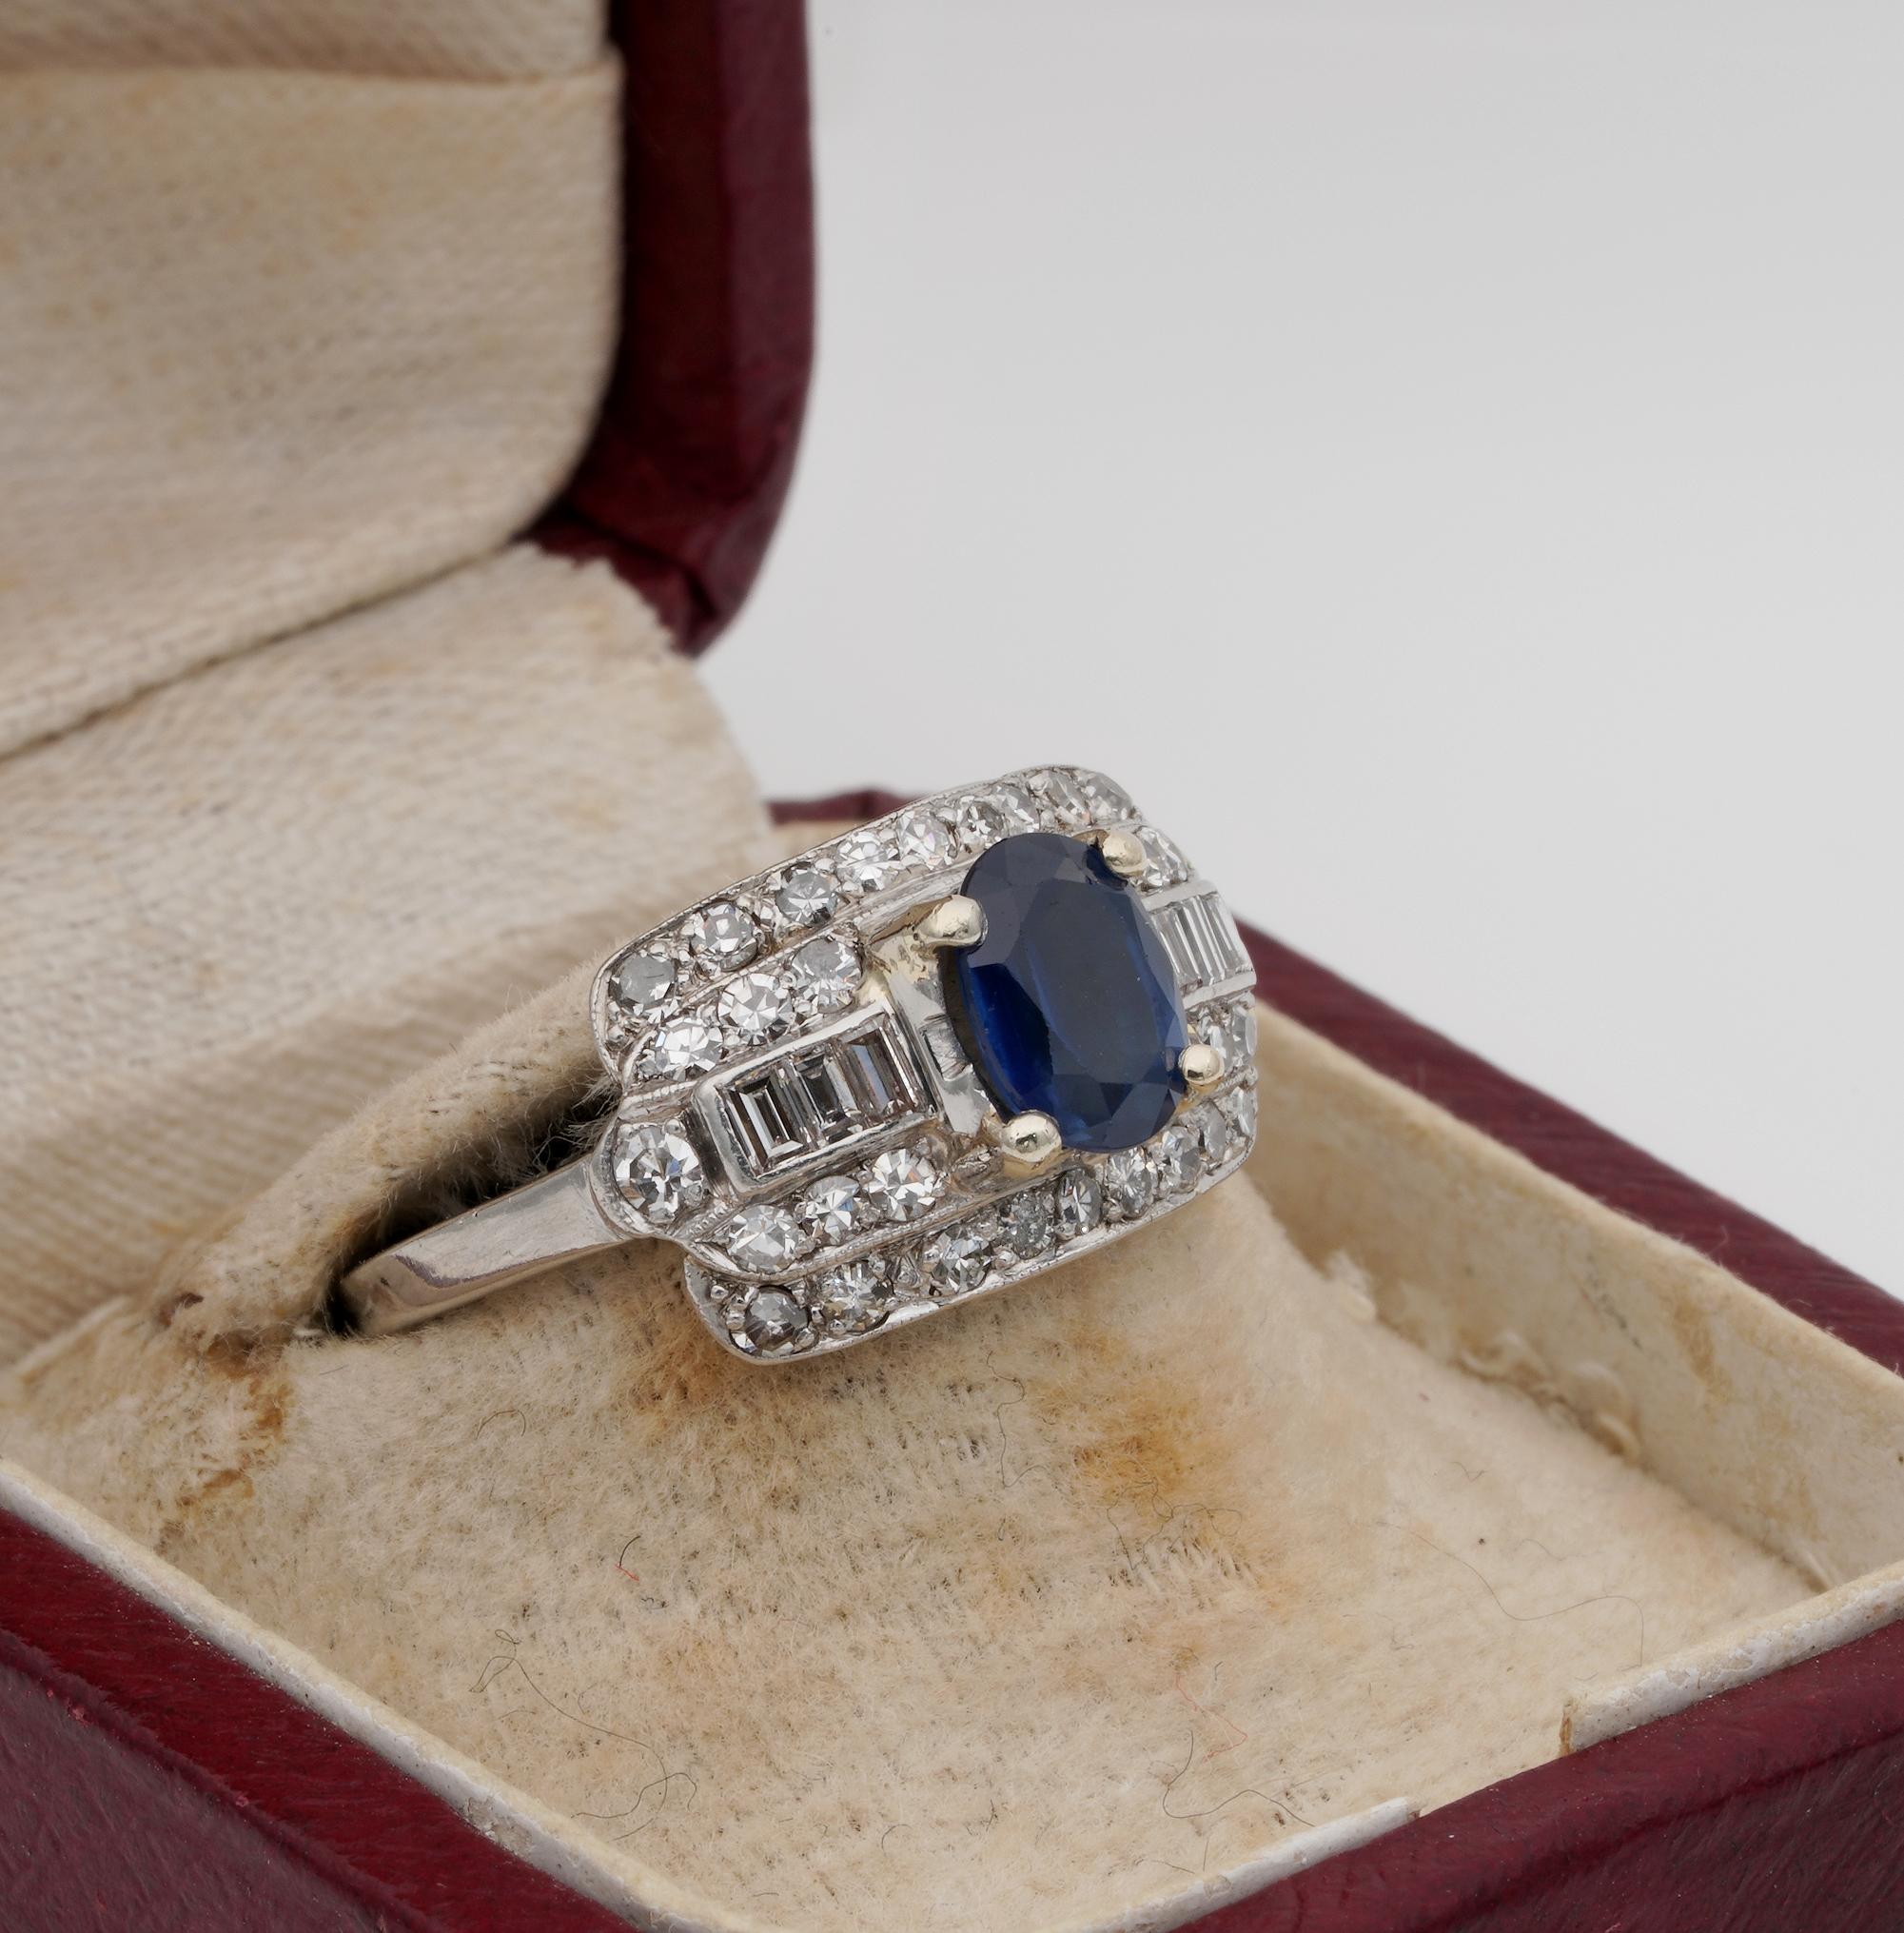 Deco Geometries

Art Deco period Diamond and Sapphire ring
Dates back to the 30's
Skilfully hand crafted of solid Platinum – marked with assay
Design elegantly develops in a geometric panel of two different cut of Diamonds creating impact to the